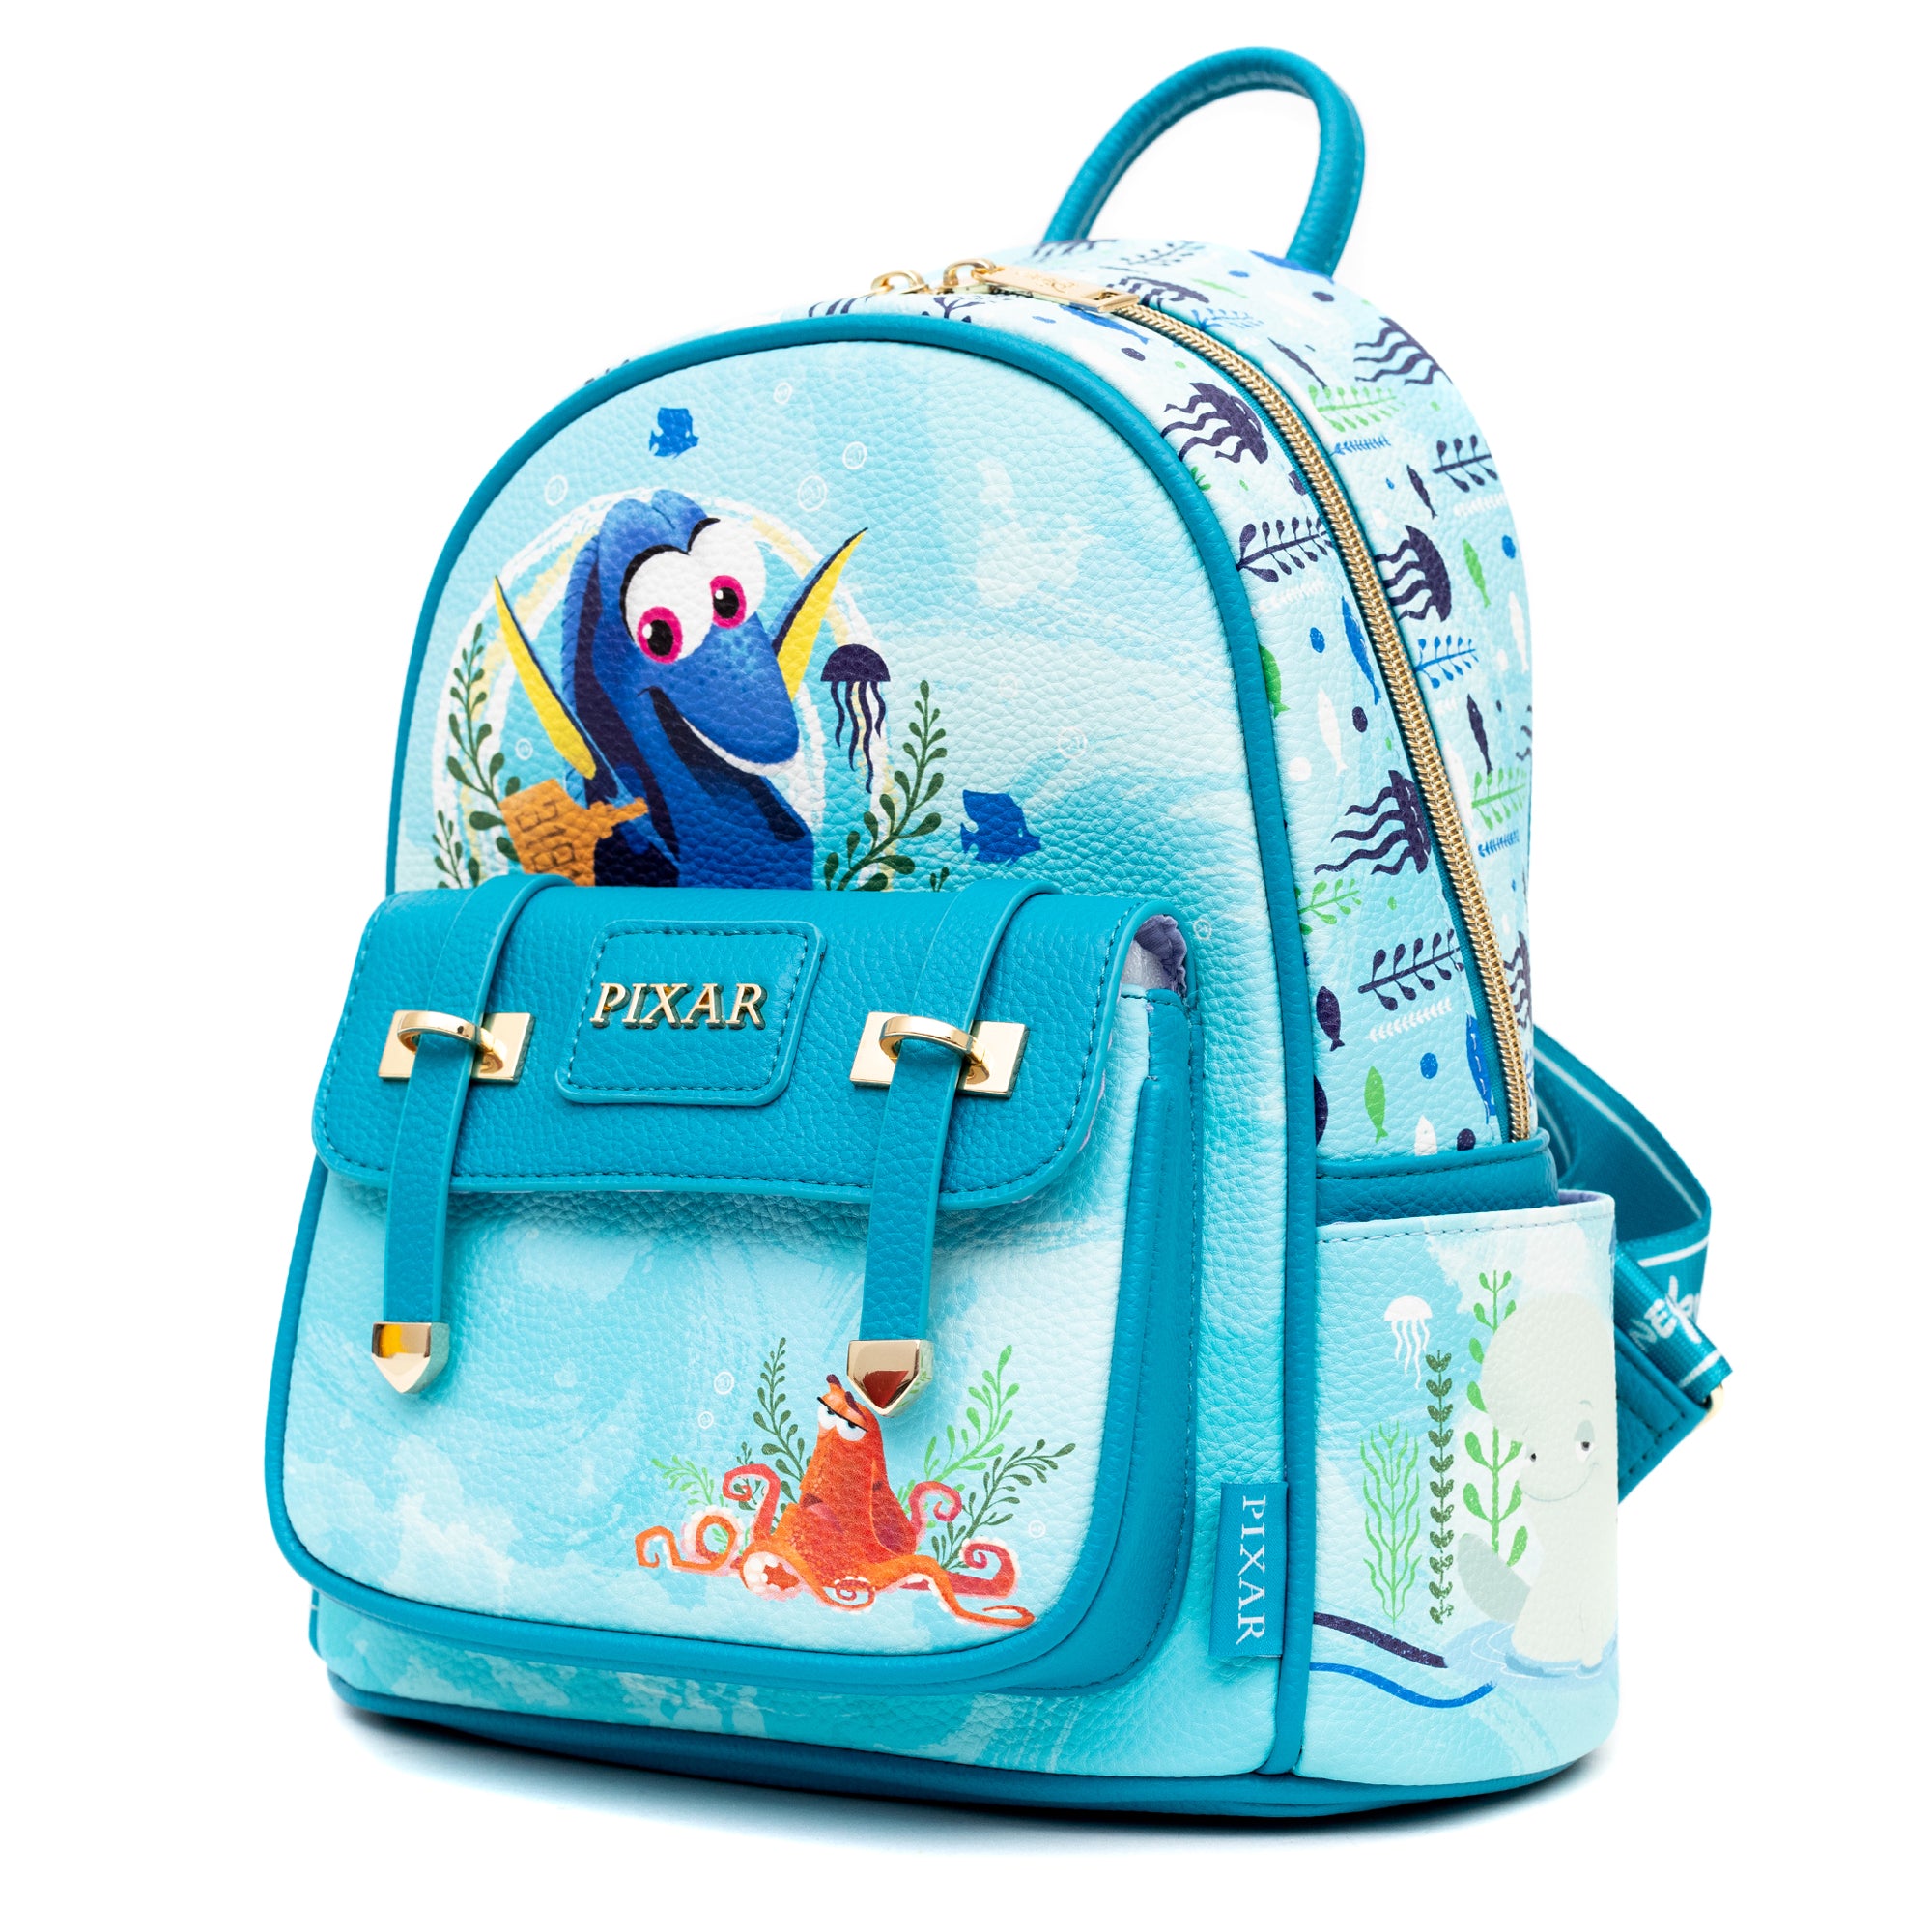 WondaPOP LUXE - Disney Pixar Finding Dory Mini Backpack - Limited Edition